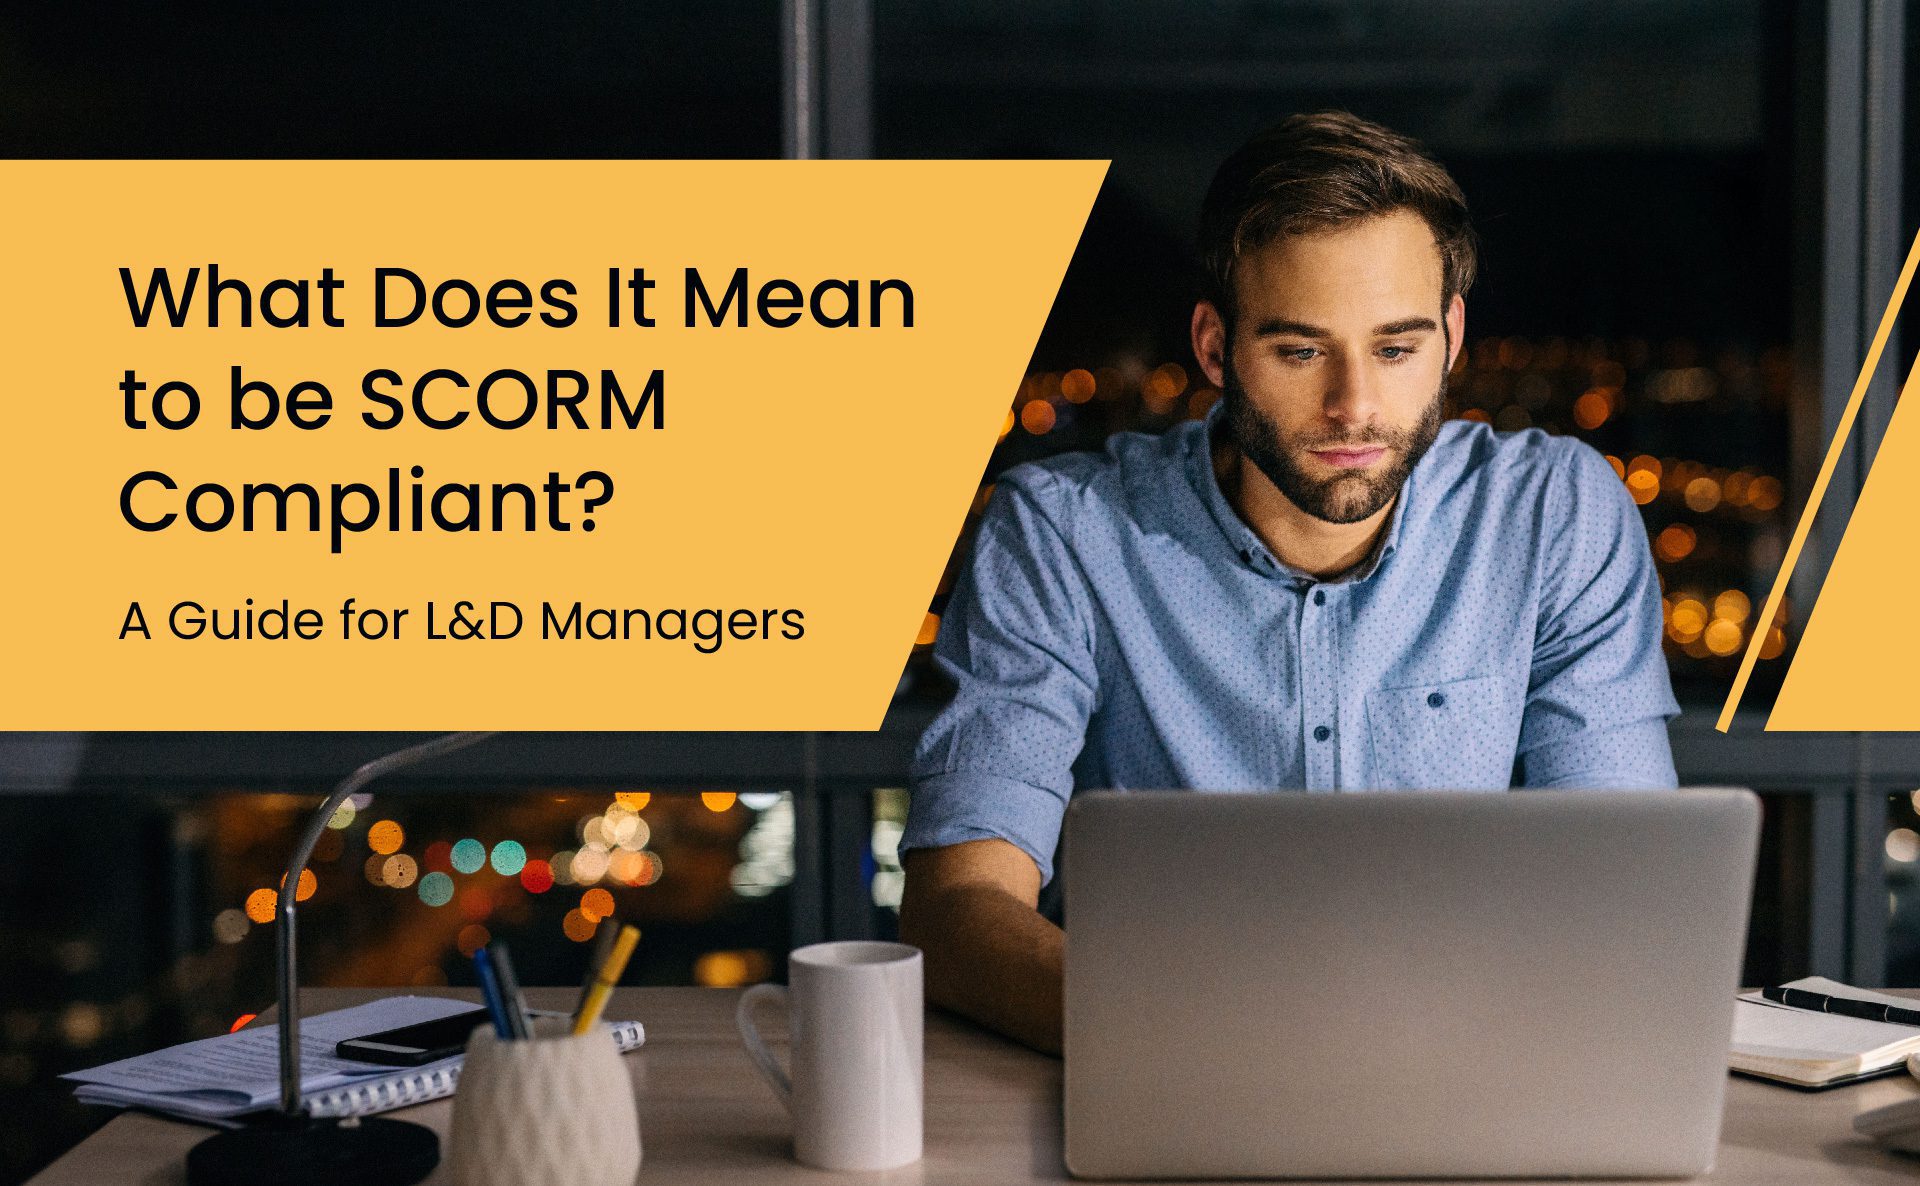 What Does It Mean to be SCORM Compliant? A Guide for L&D Managers